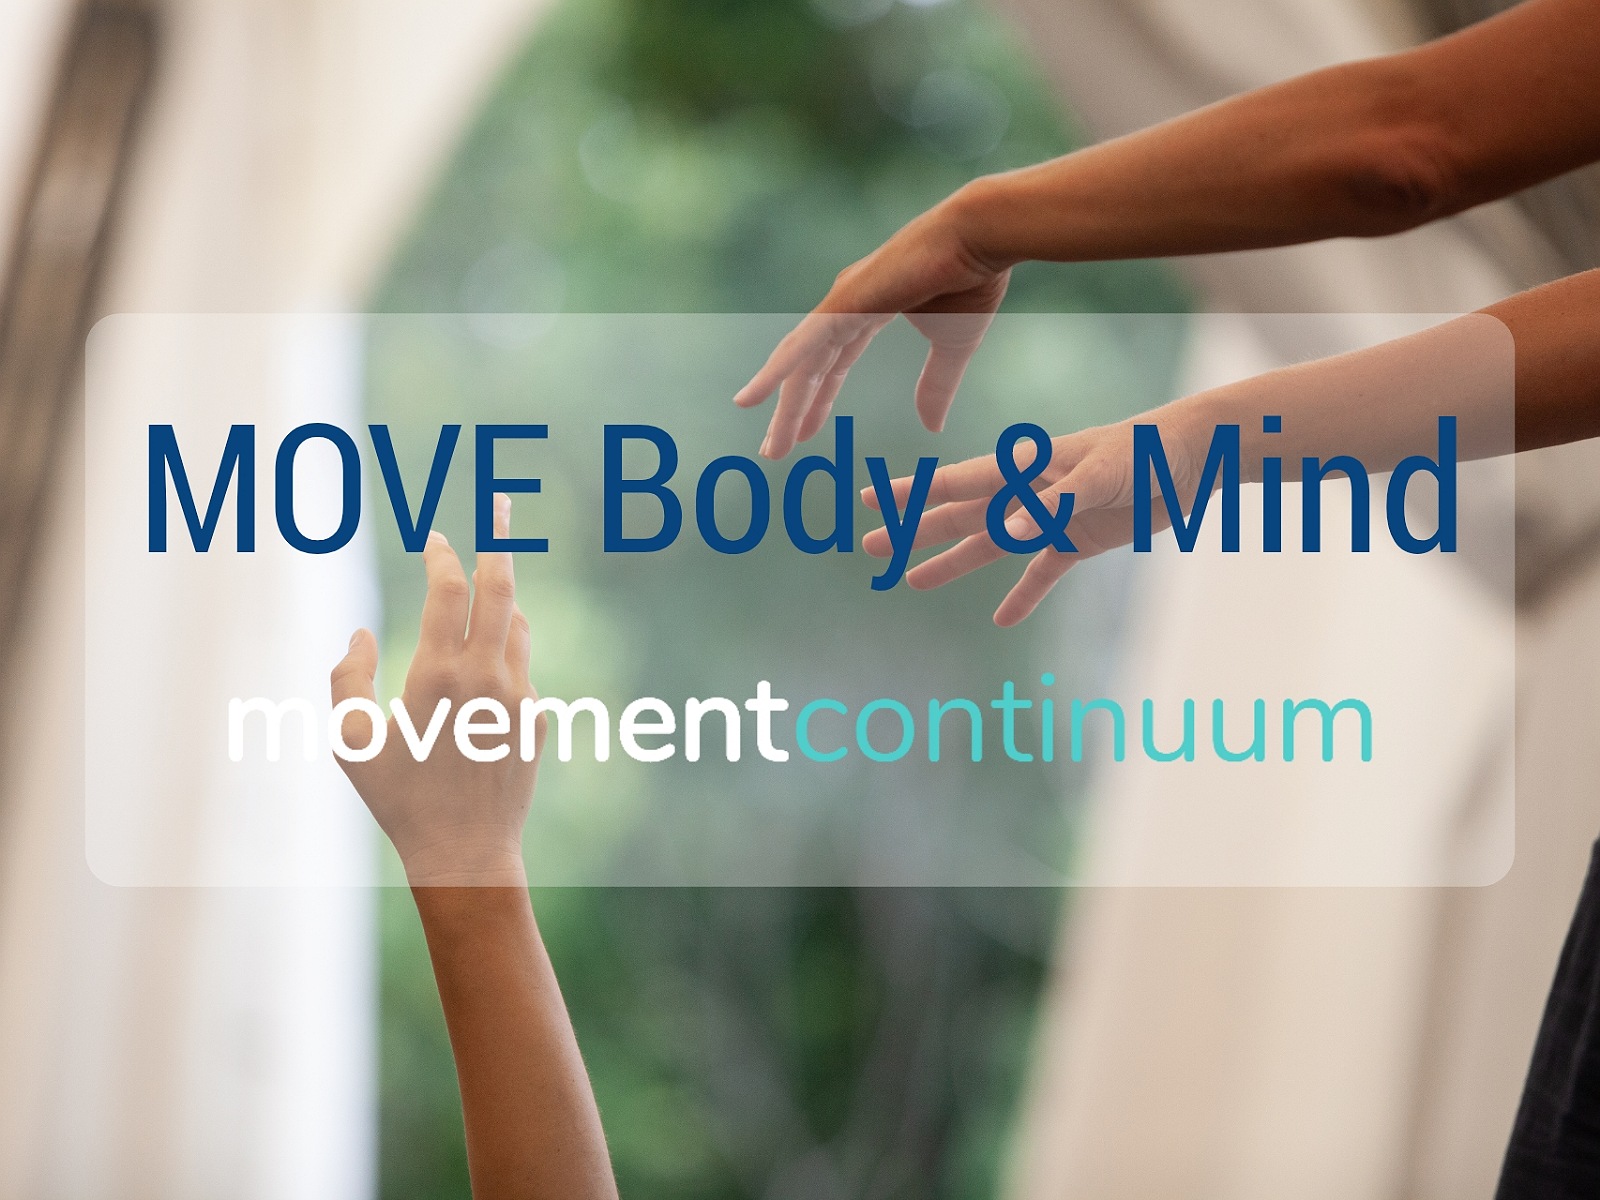 MOVE Body & Mind Session